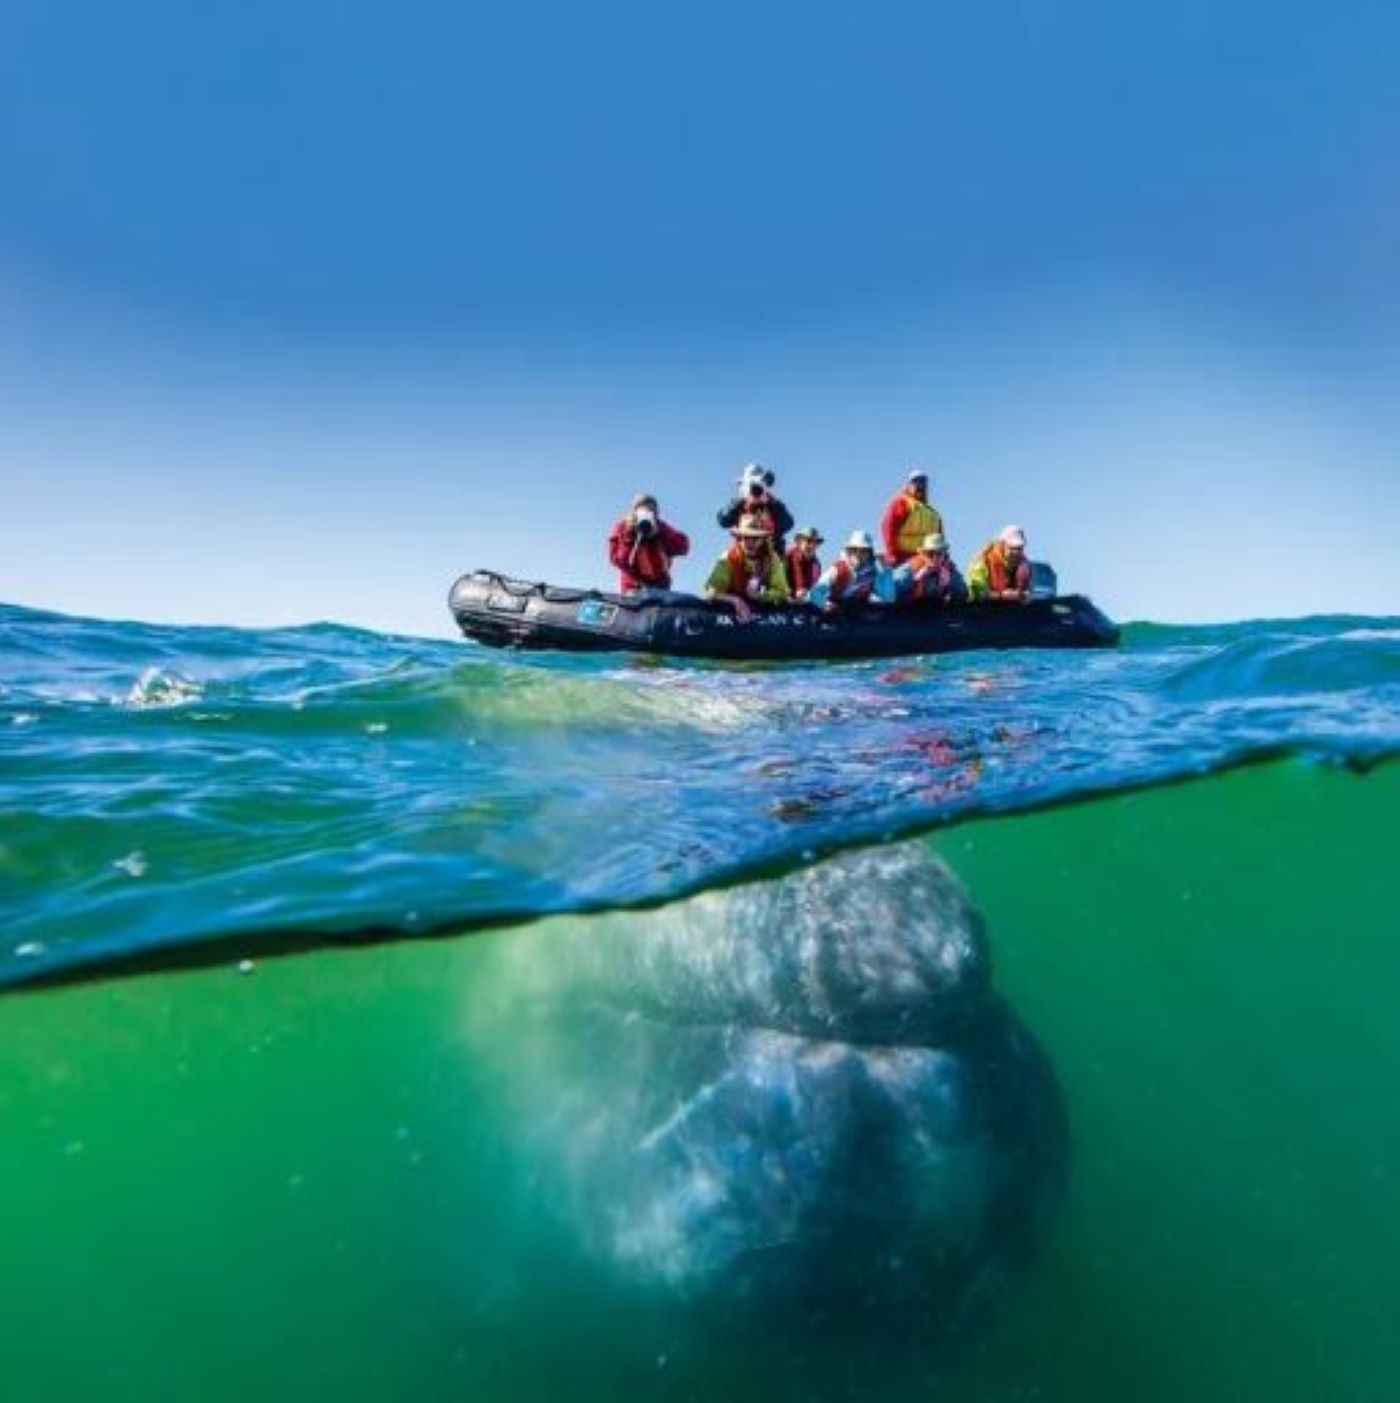 Zodiac boat above water with a whale swimming underneath in the ocean